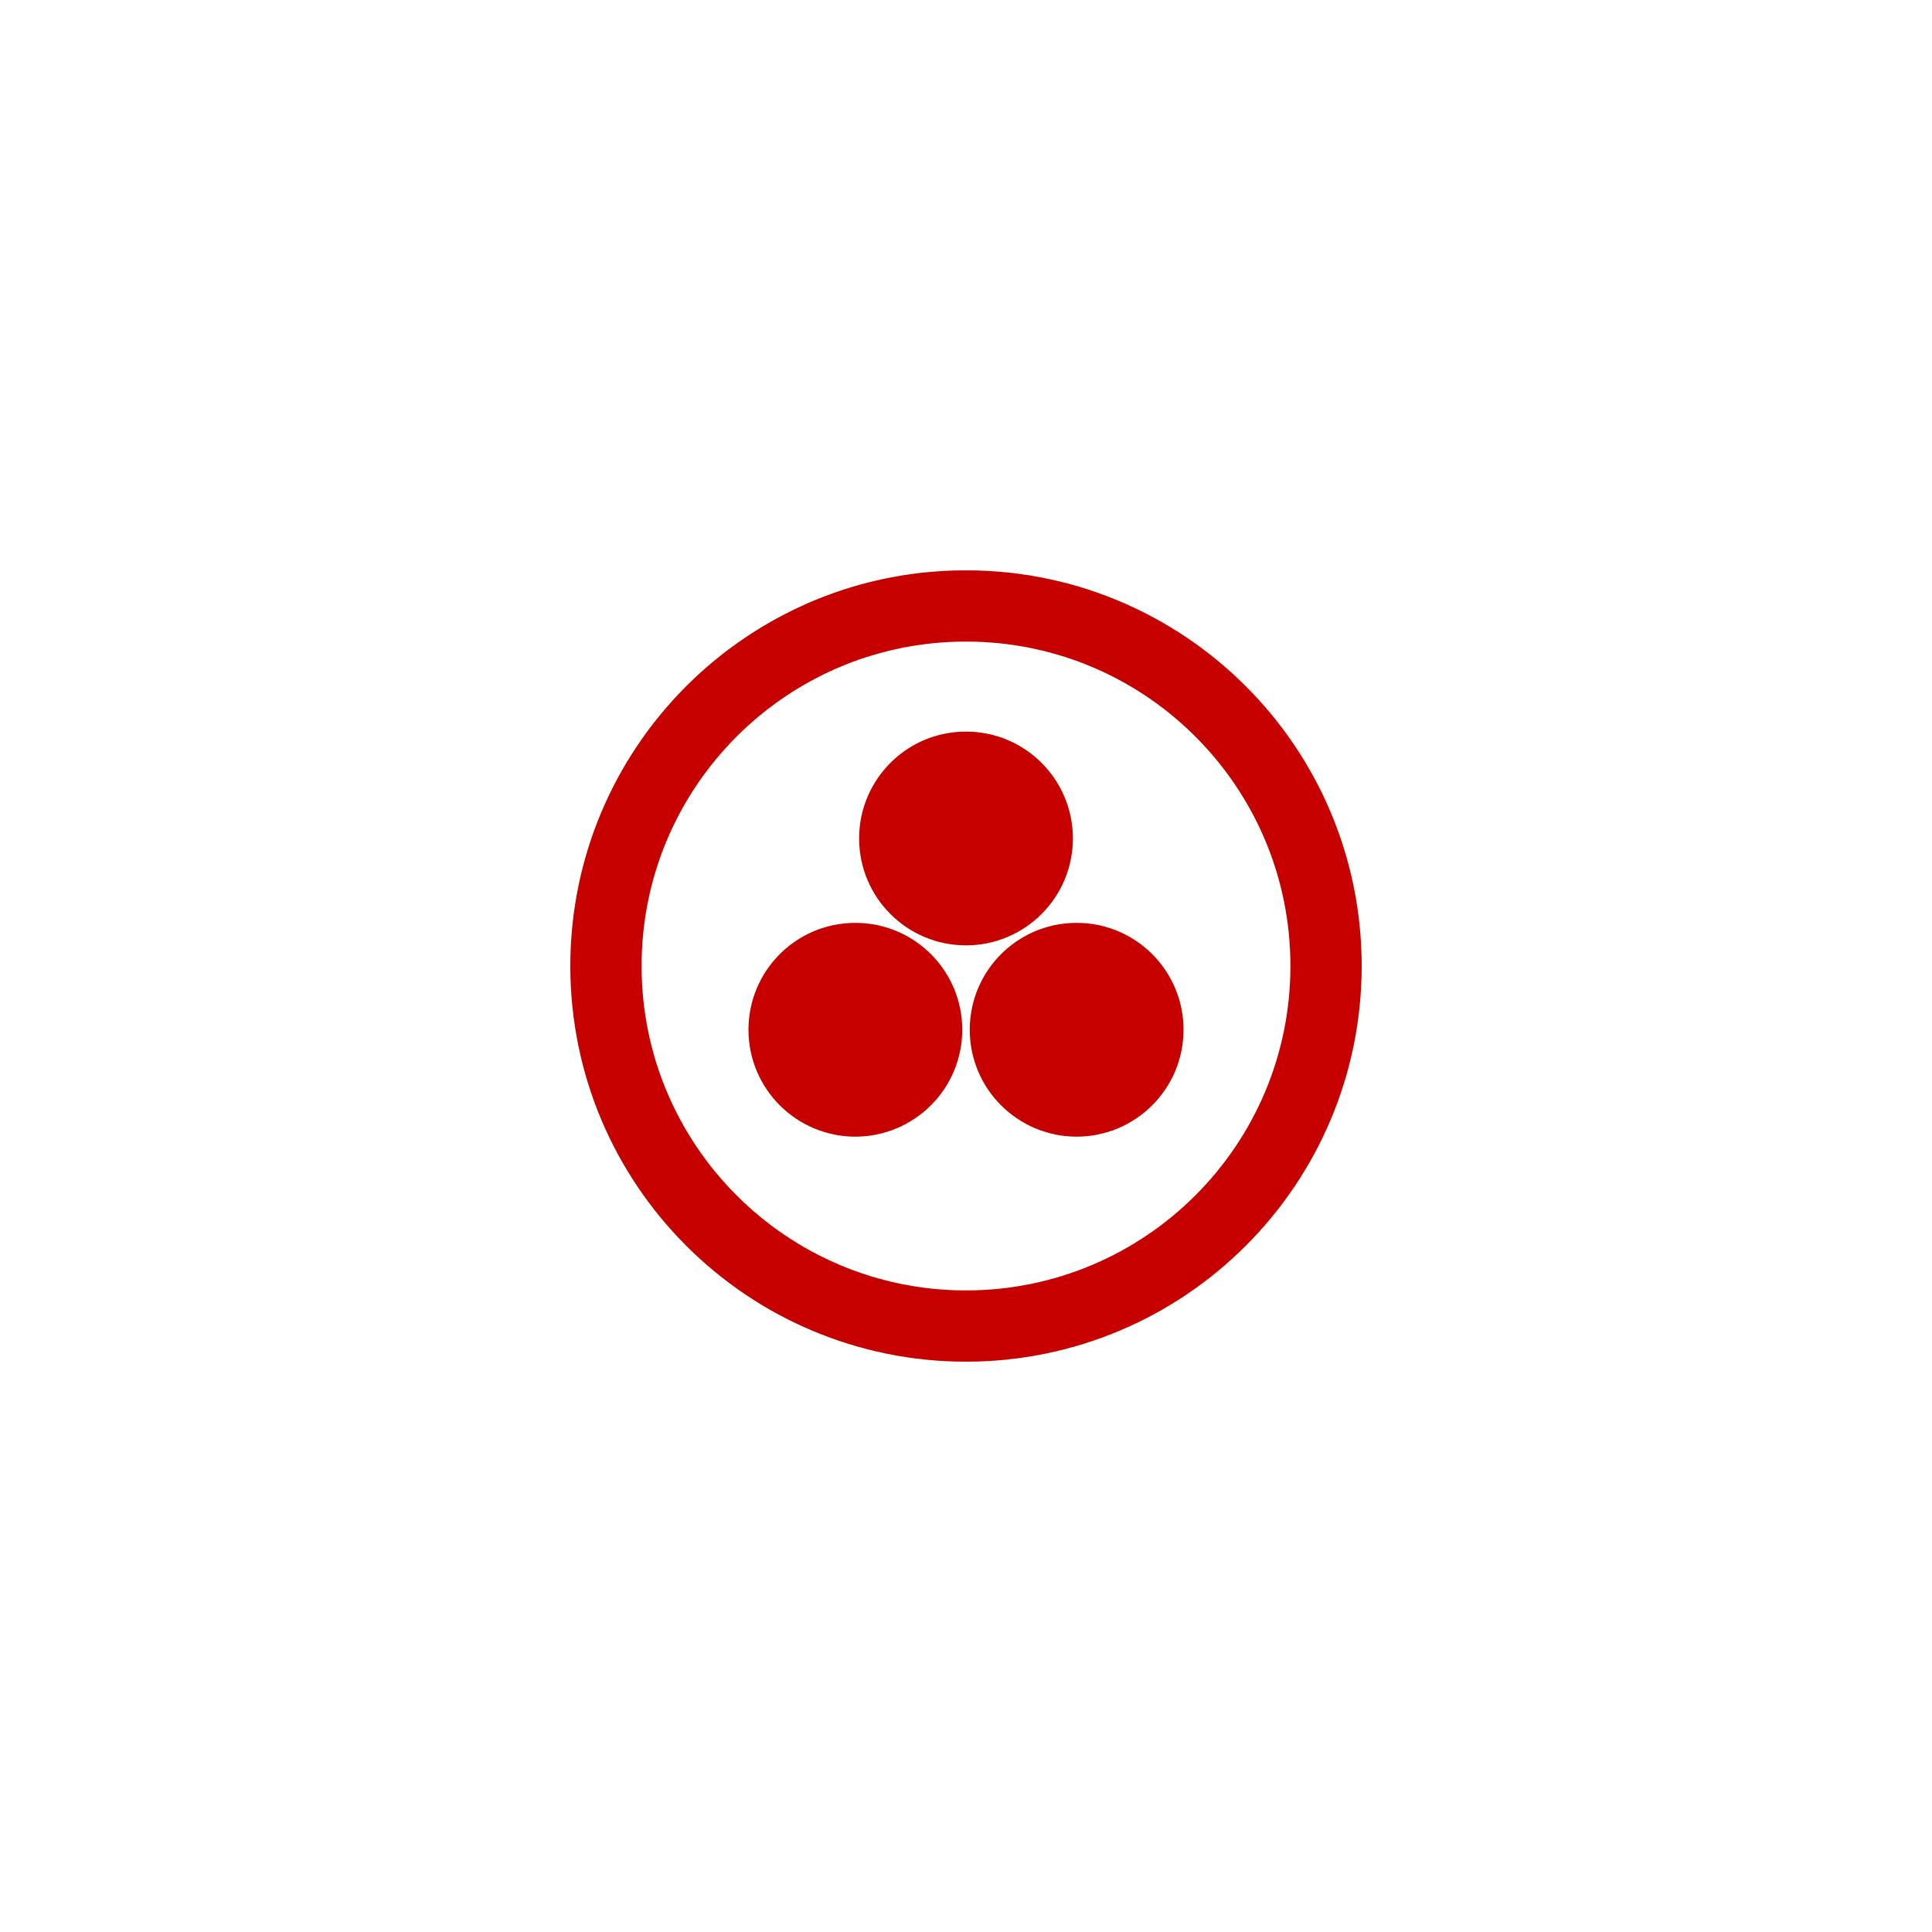 The Pax Cultura emblem: a maroon on white emblem consisting of three solid circles in a surrounding circle.